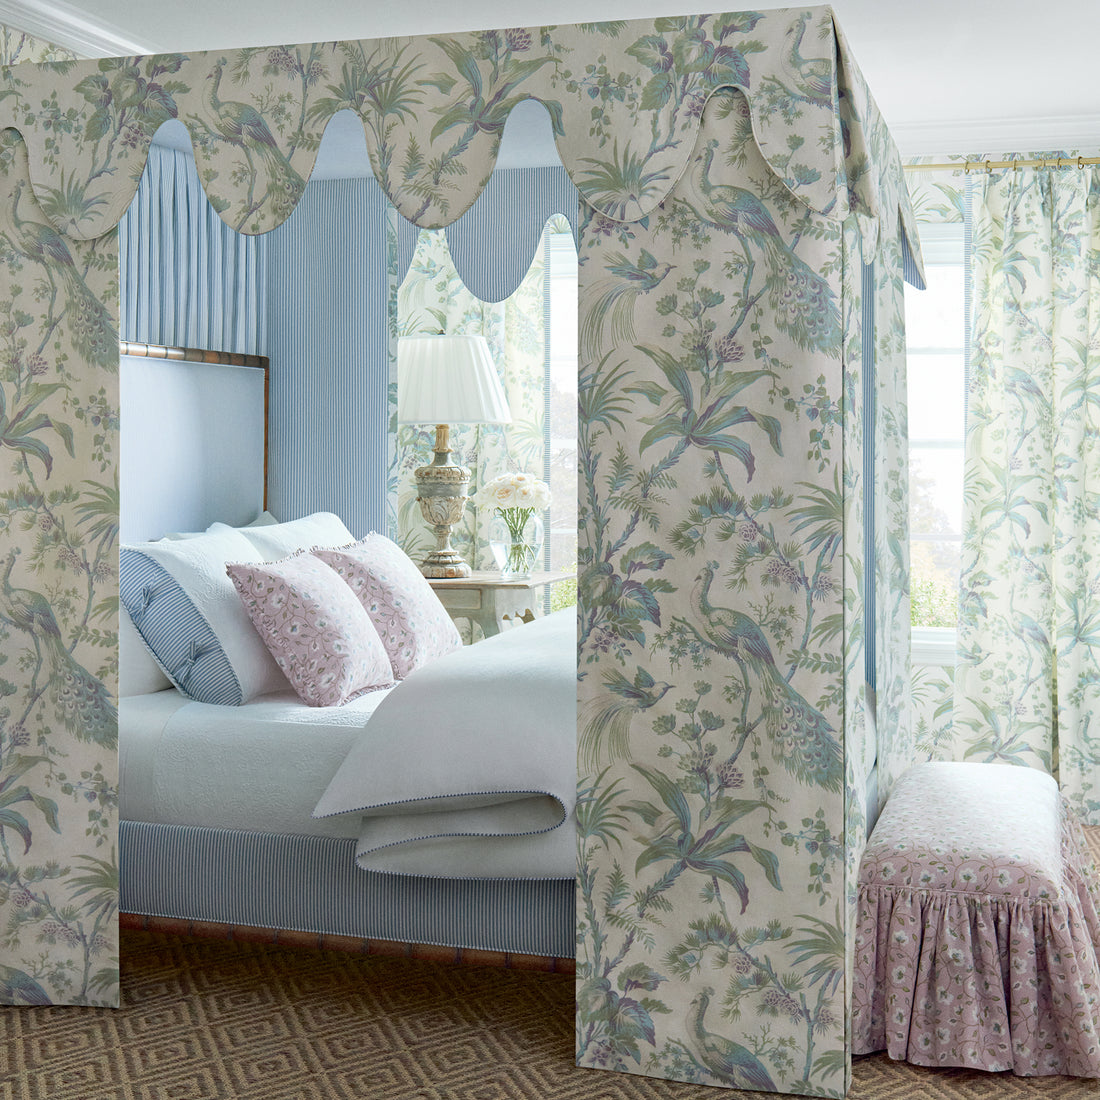 Draperies and bed canopy in Peacock toile printed fabric in green and plum color - pattern number AF57829 by Anna French in the Bristol collection